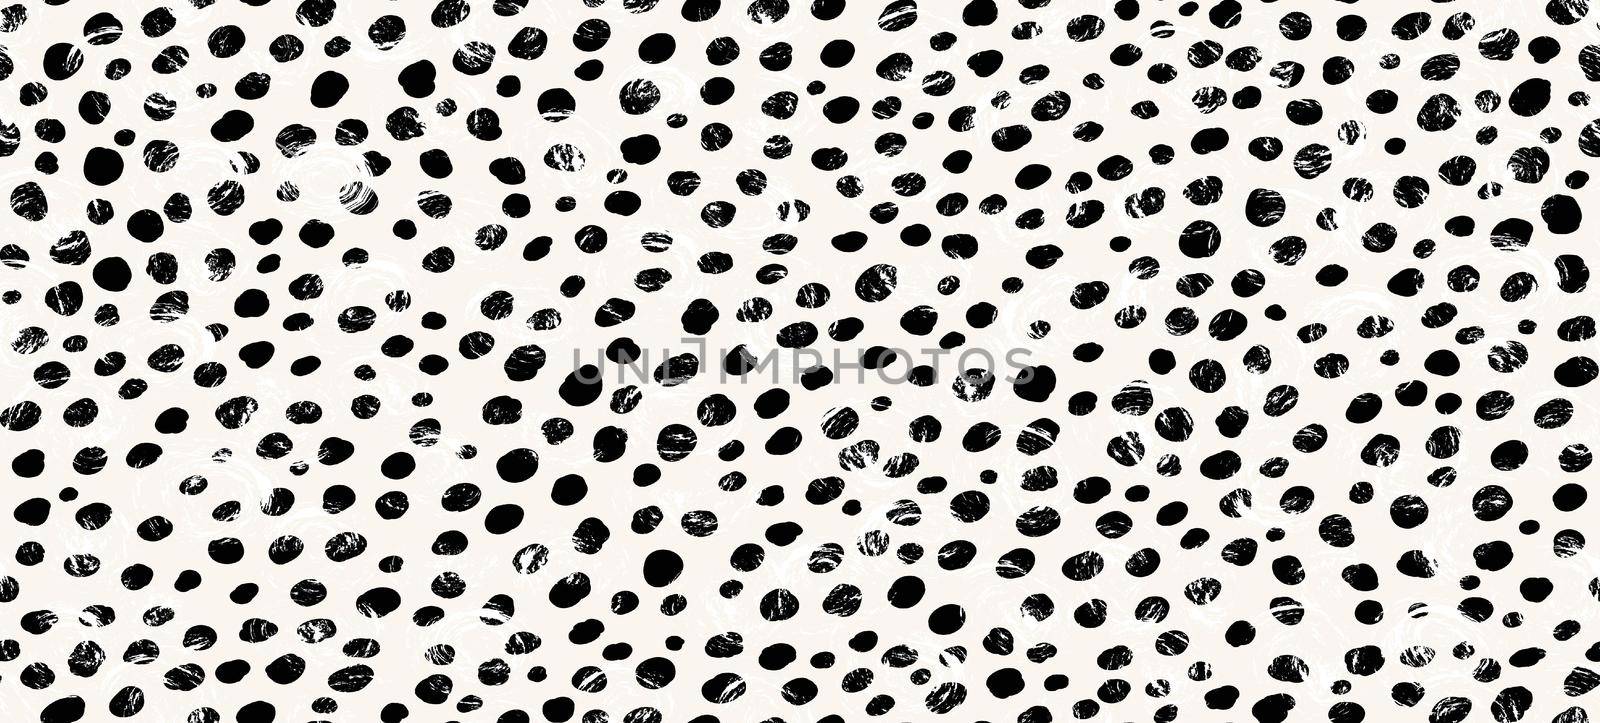 Abstract modern leopard seamless pattern. Animals trendy background. Black and white decorative vector stock illustration for print, card, postcard, fabric, textile. Modern ornament of stylized skin by allaku